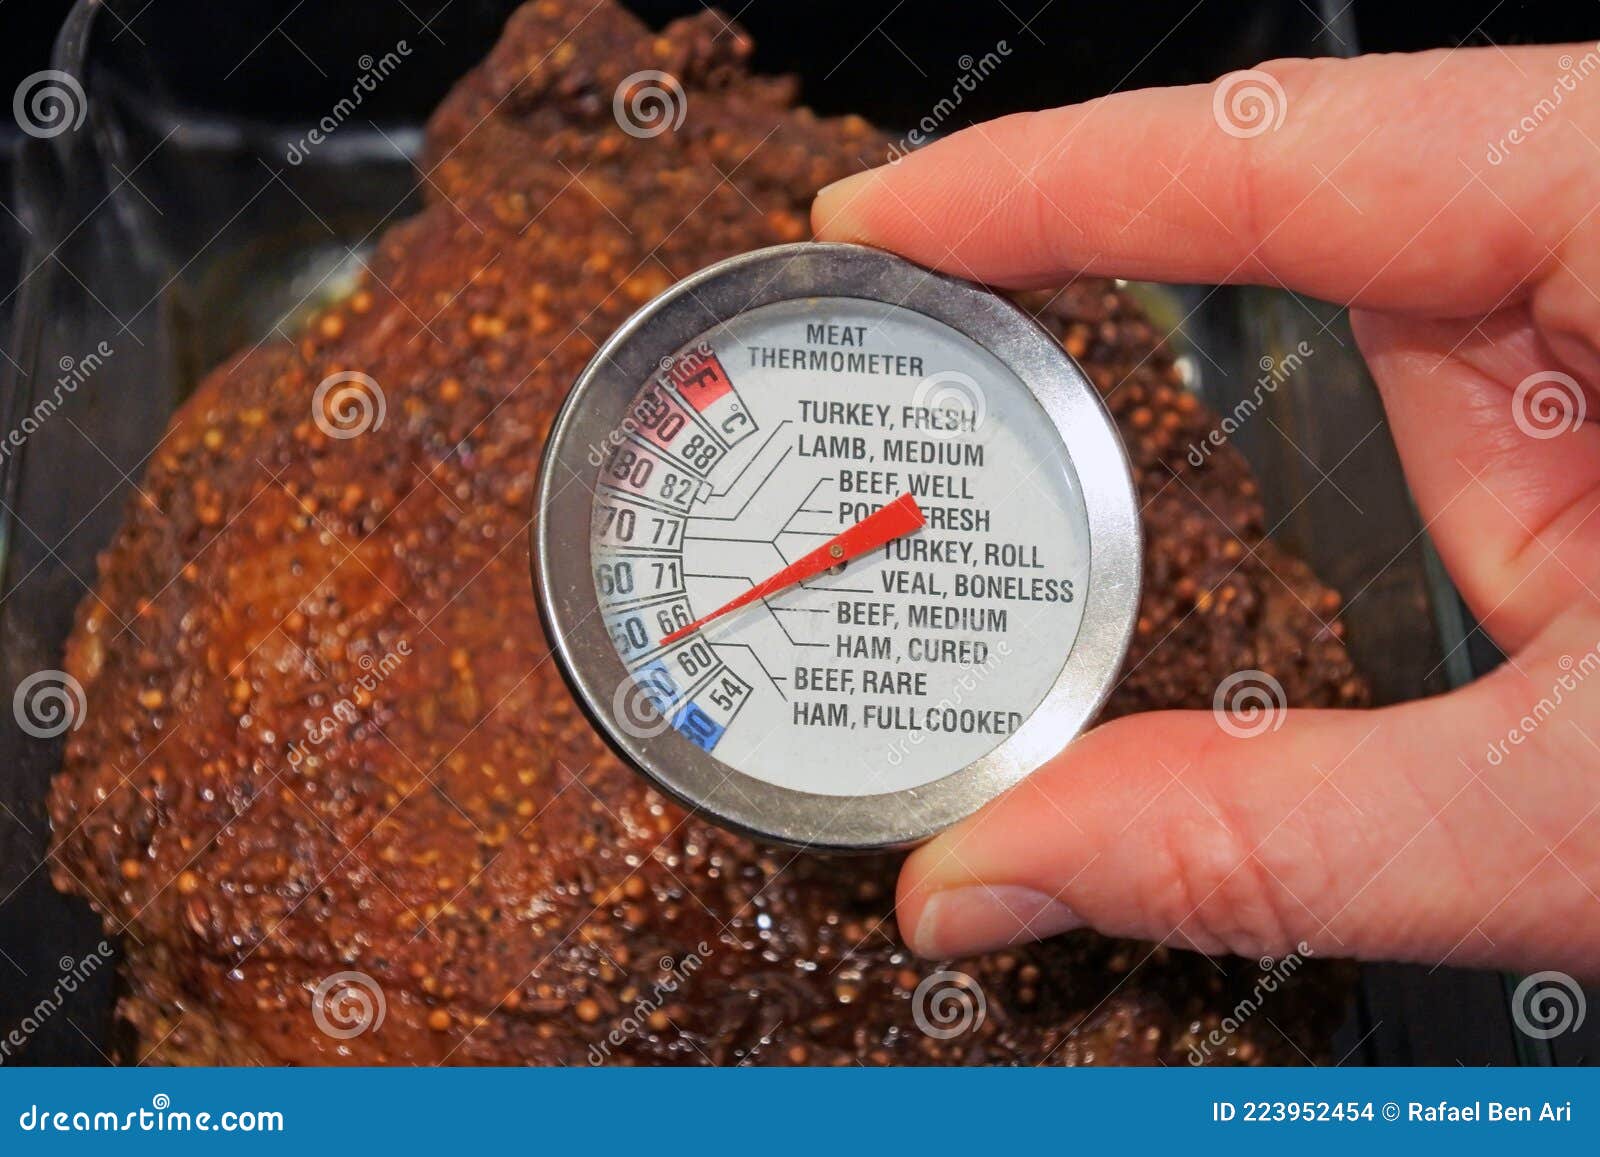 https://thumbs.dreamstime.com/z/person-using-temperature-gauge-tester-meter-food-thermometer-female-hand-roasted-lamb-home-oven-223952454.jpg